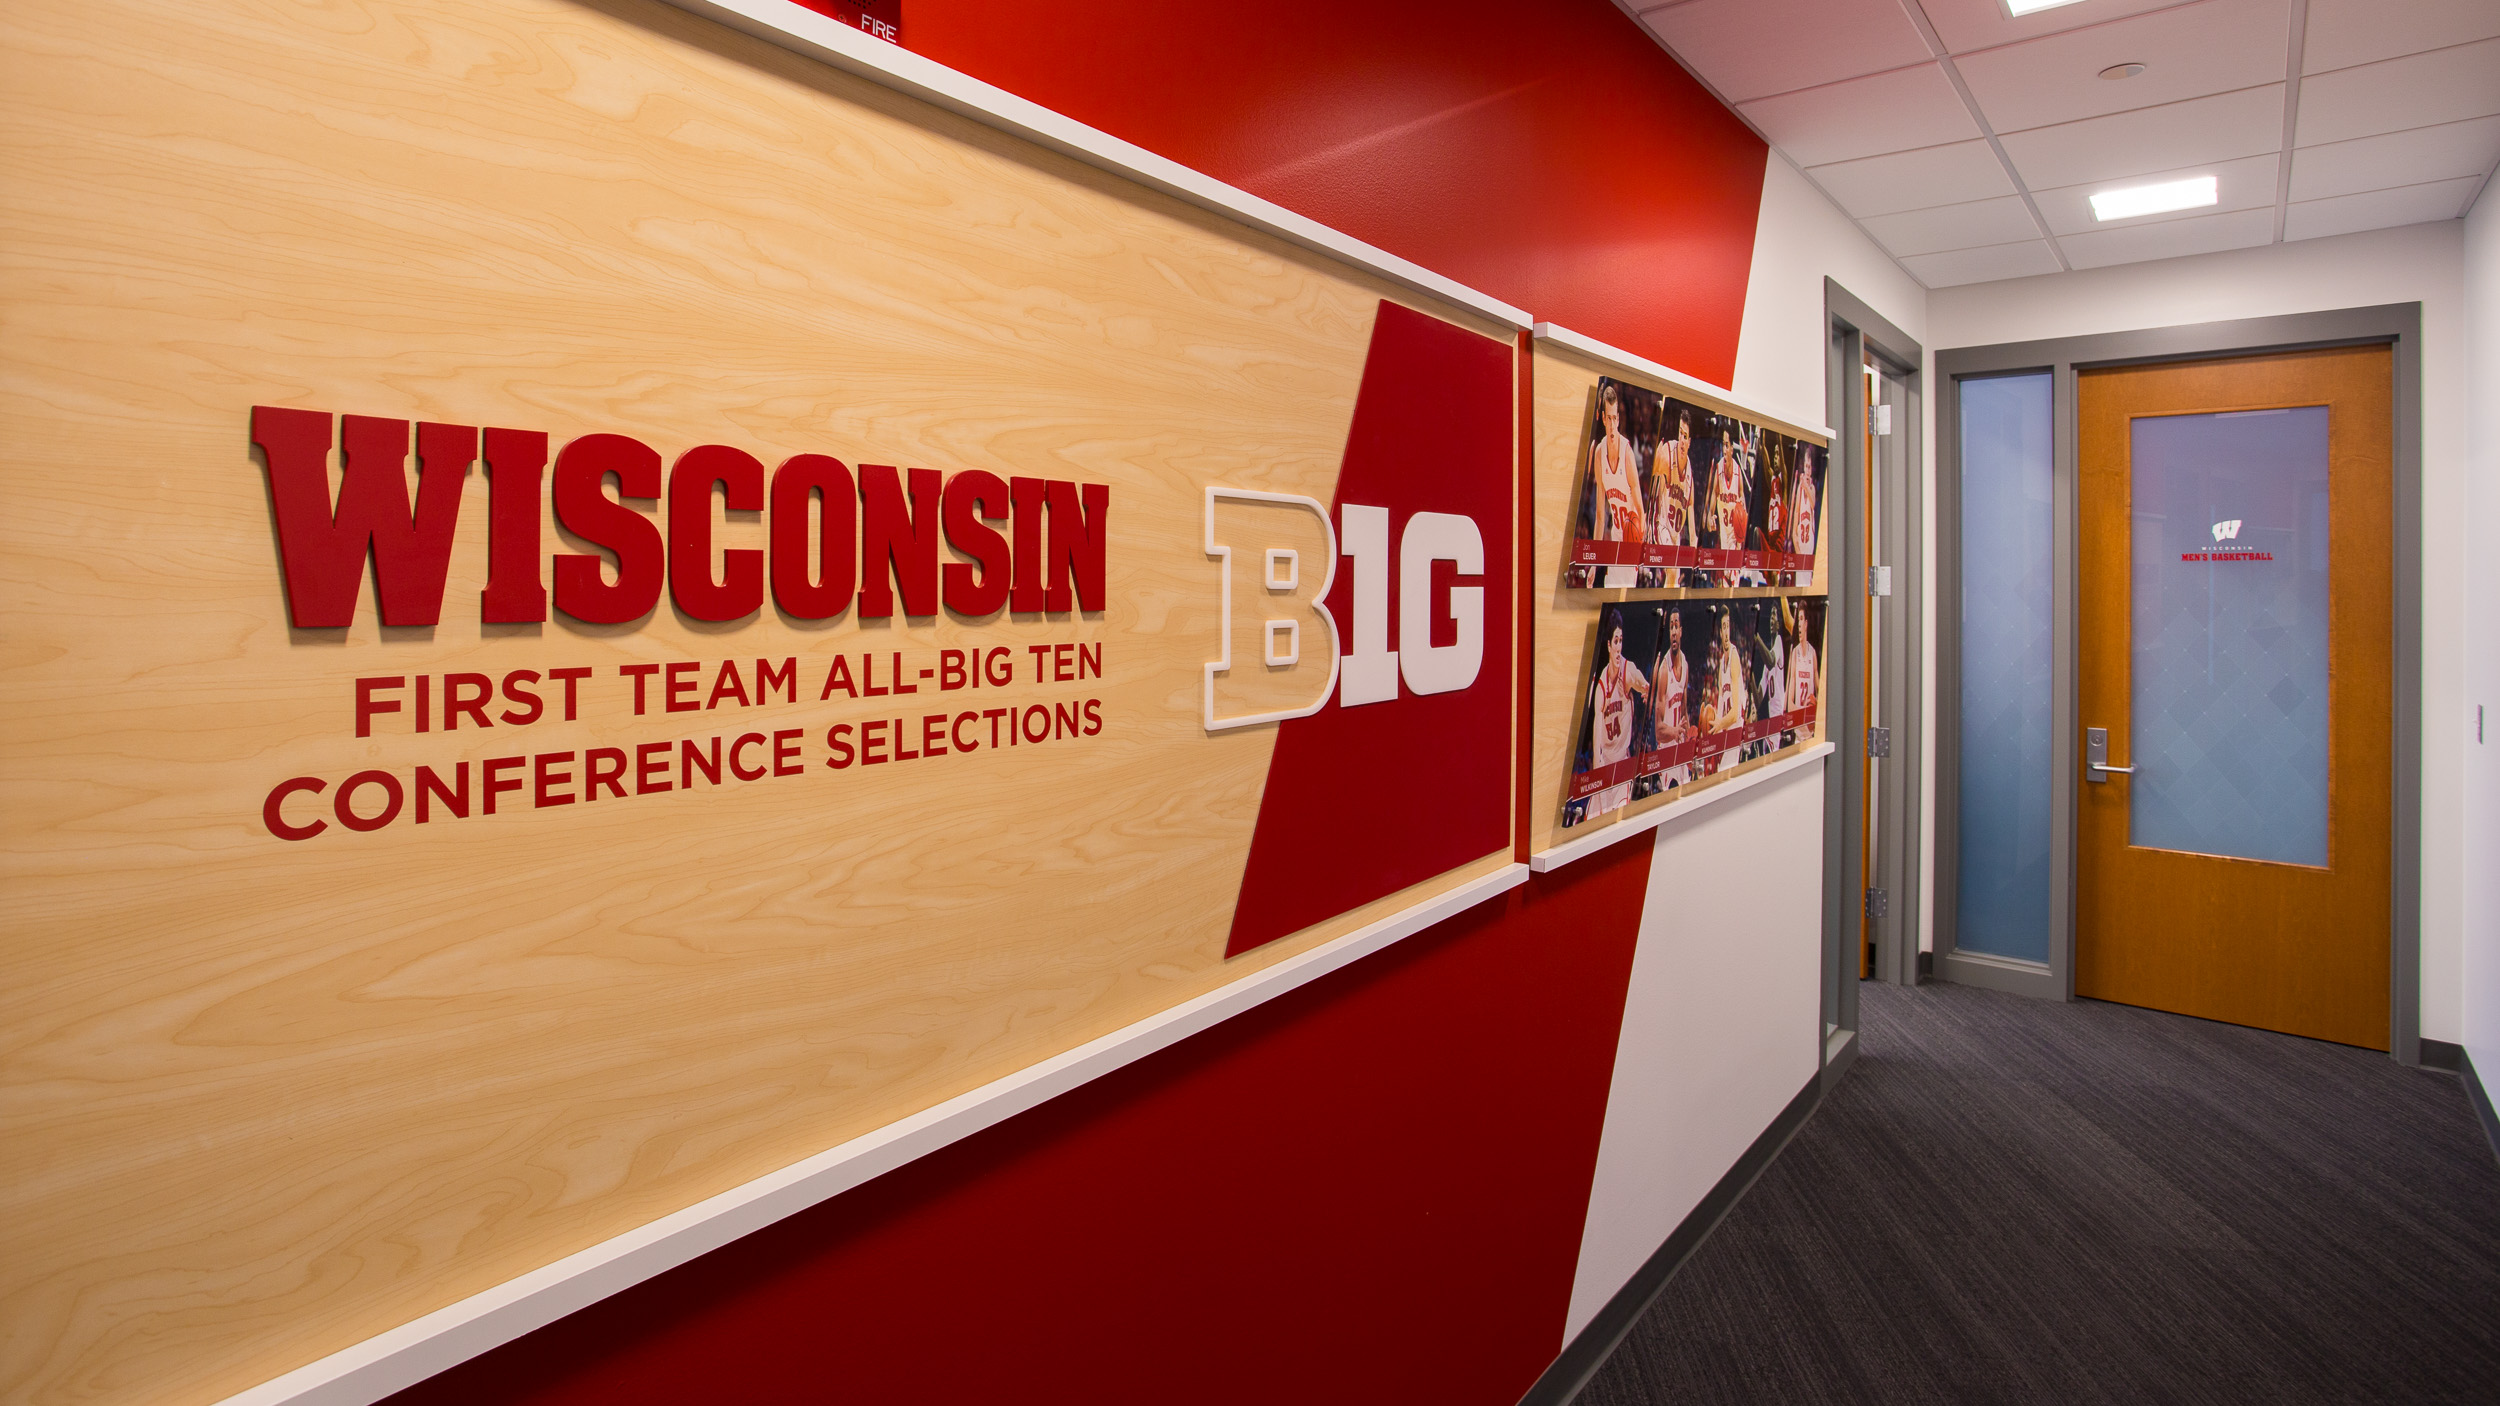 University of Wisconsin - Basketball Offices Big Ten Player Wall Acrylic Lettering